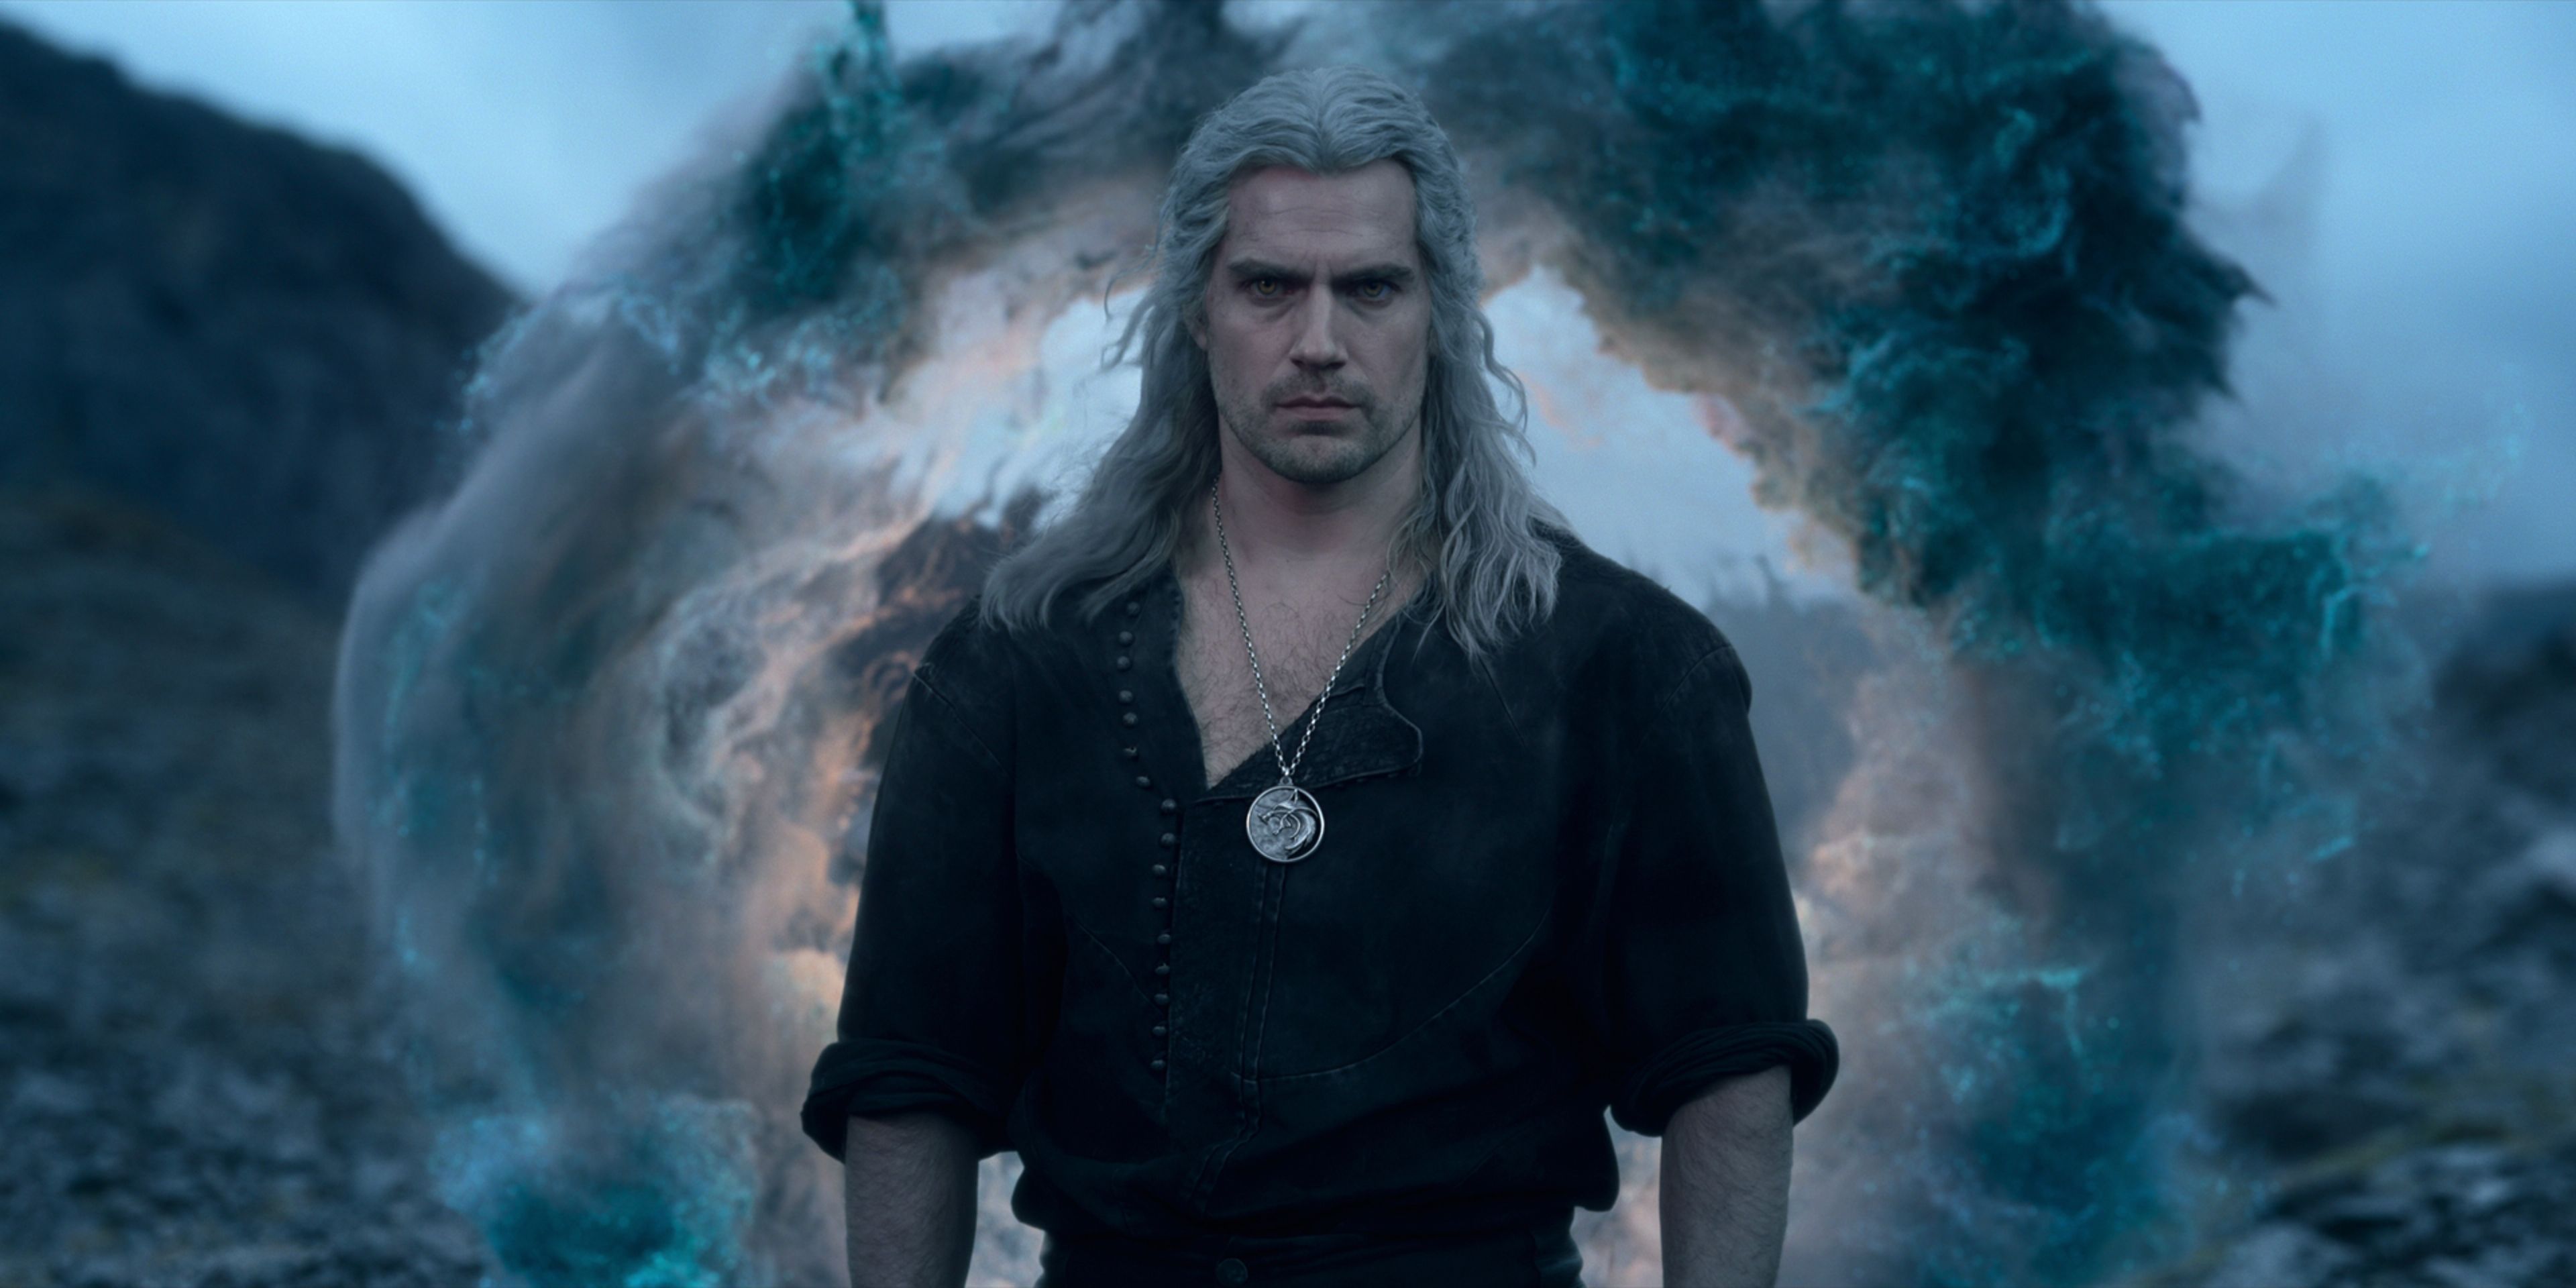 The Witcher' Season 3, Part 1 Ending, Explained: What Happened?